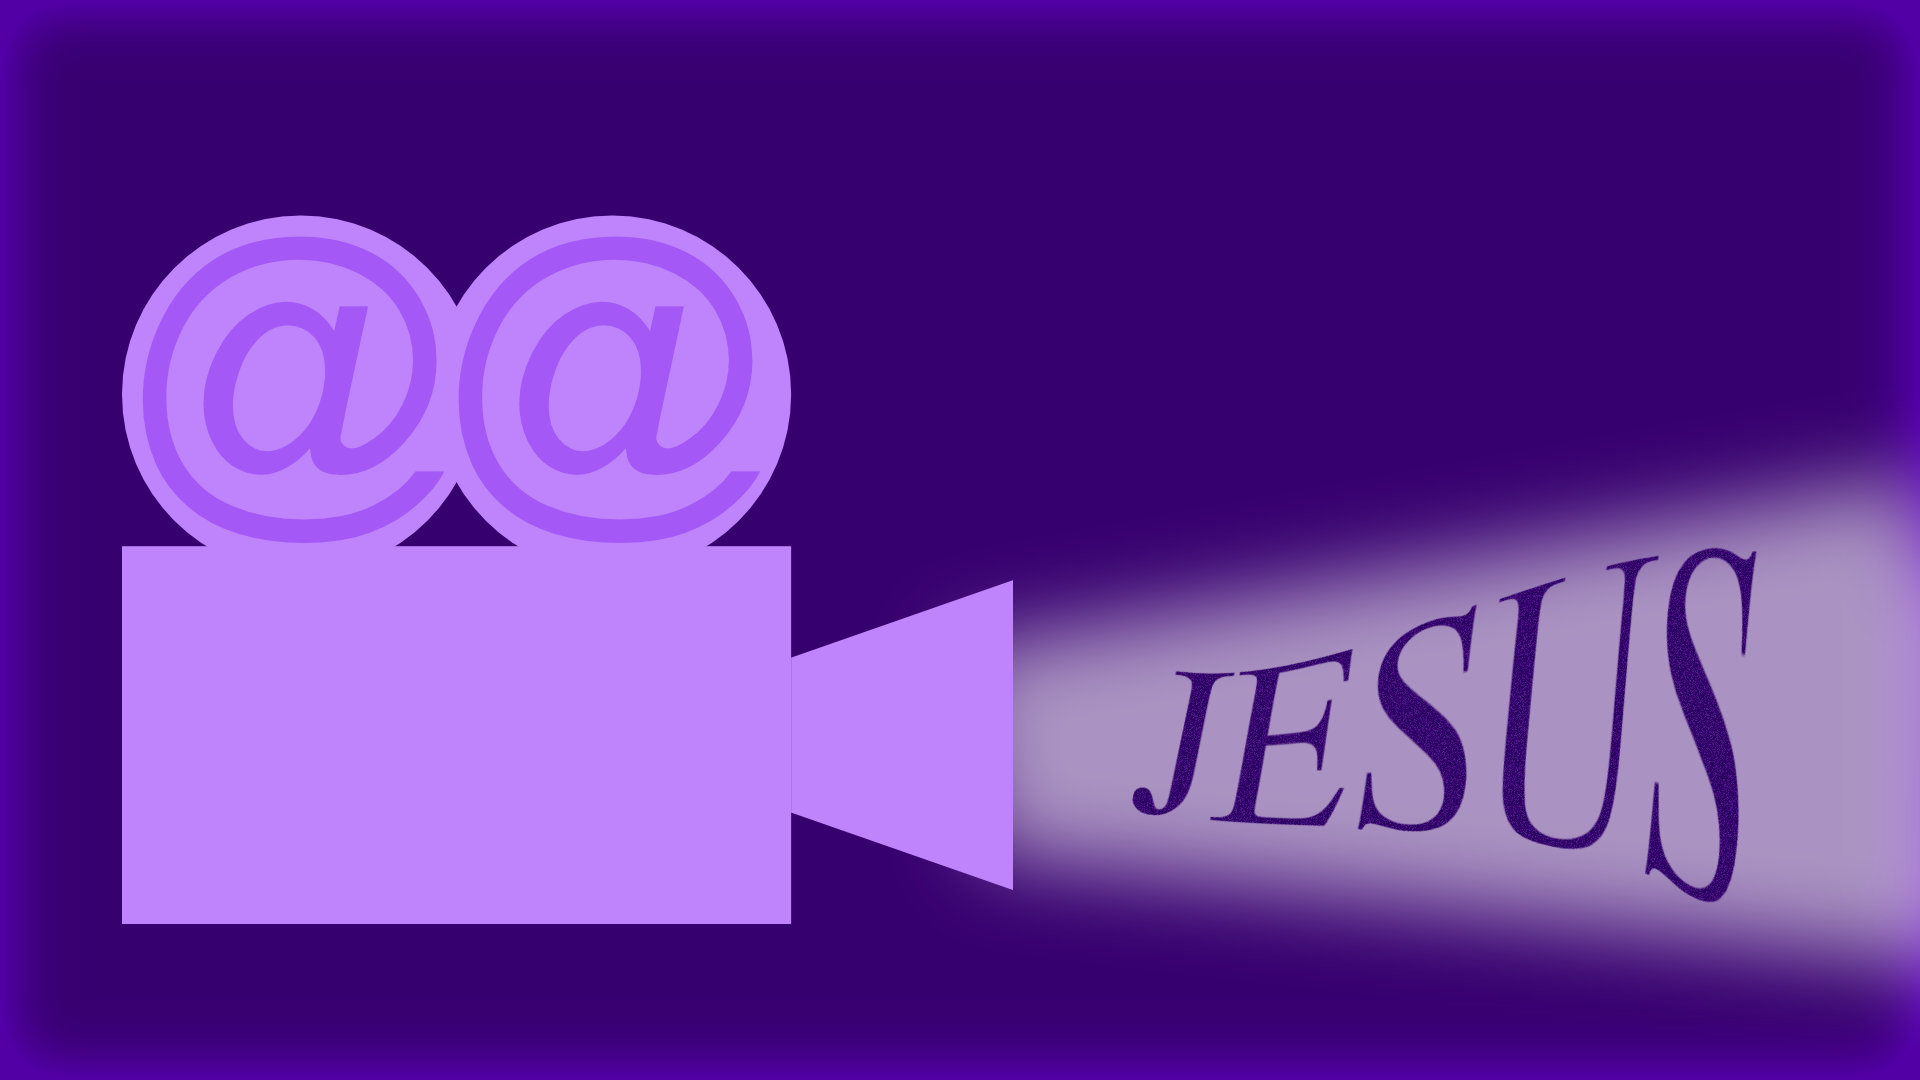 A purple coloured graphical image of a movie projector, with a beam of light showing the name 'Jesus'.